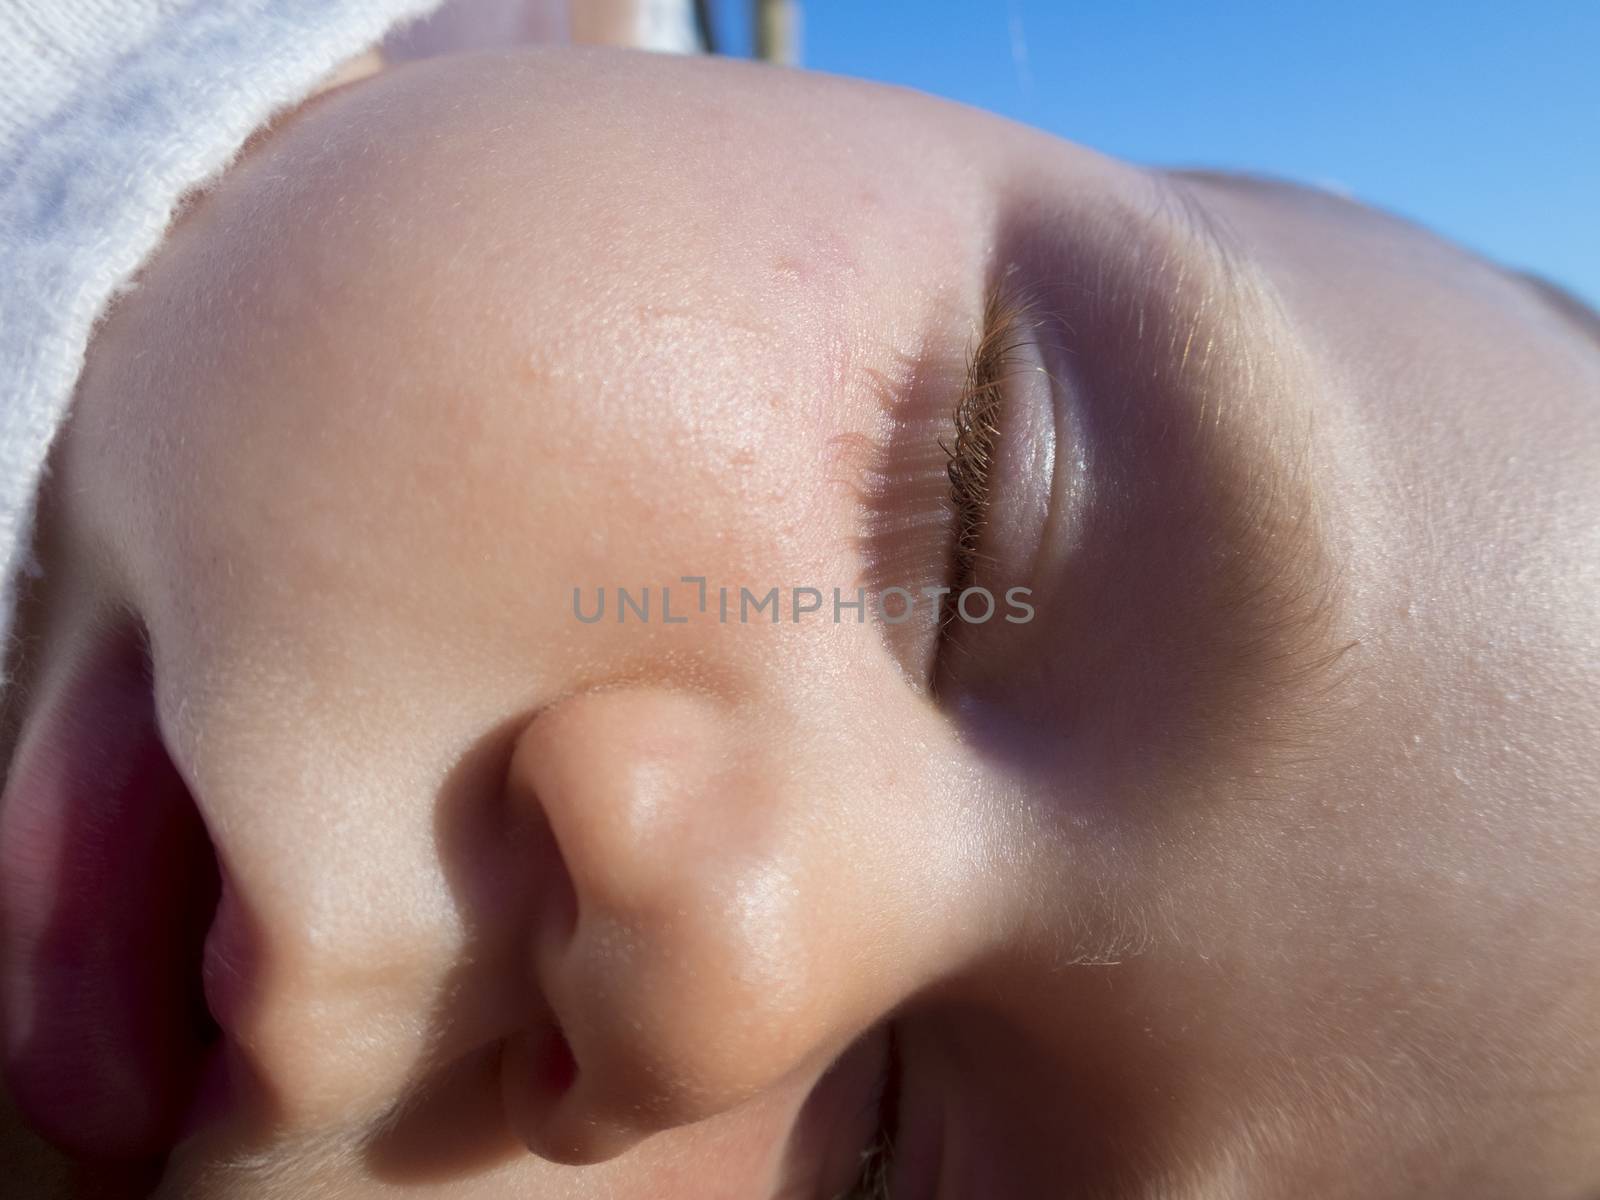 close-up face of baby eye nose mouth sleeping with irritated skin and grains